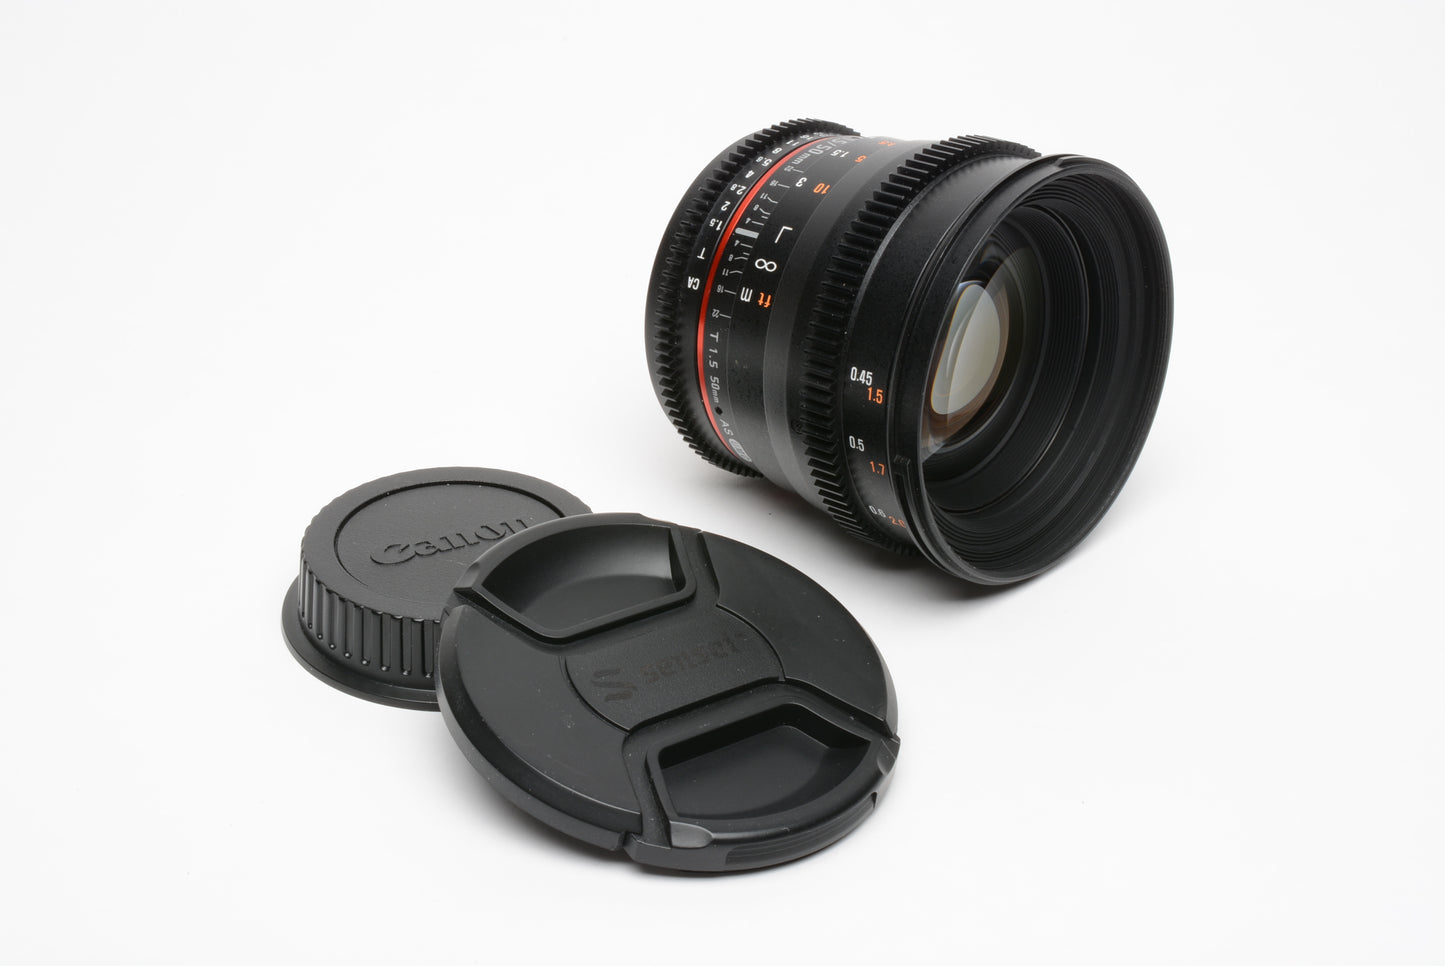 Rokinon 50mm T1.5 AS UMC Cine DS Lens for Canon EF Mount, Nice